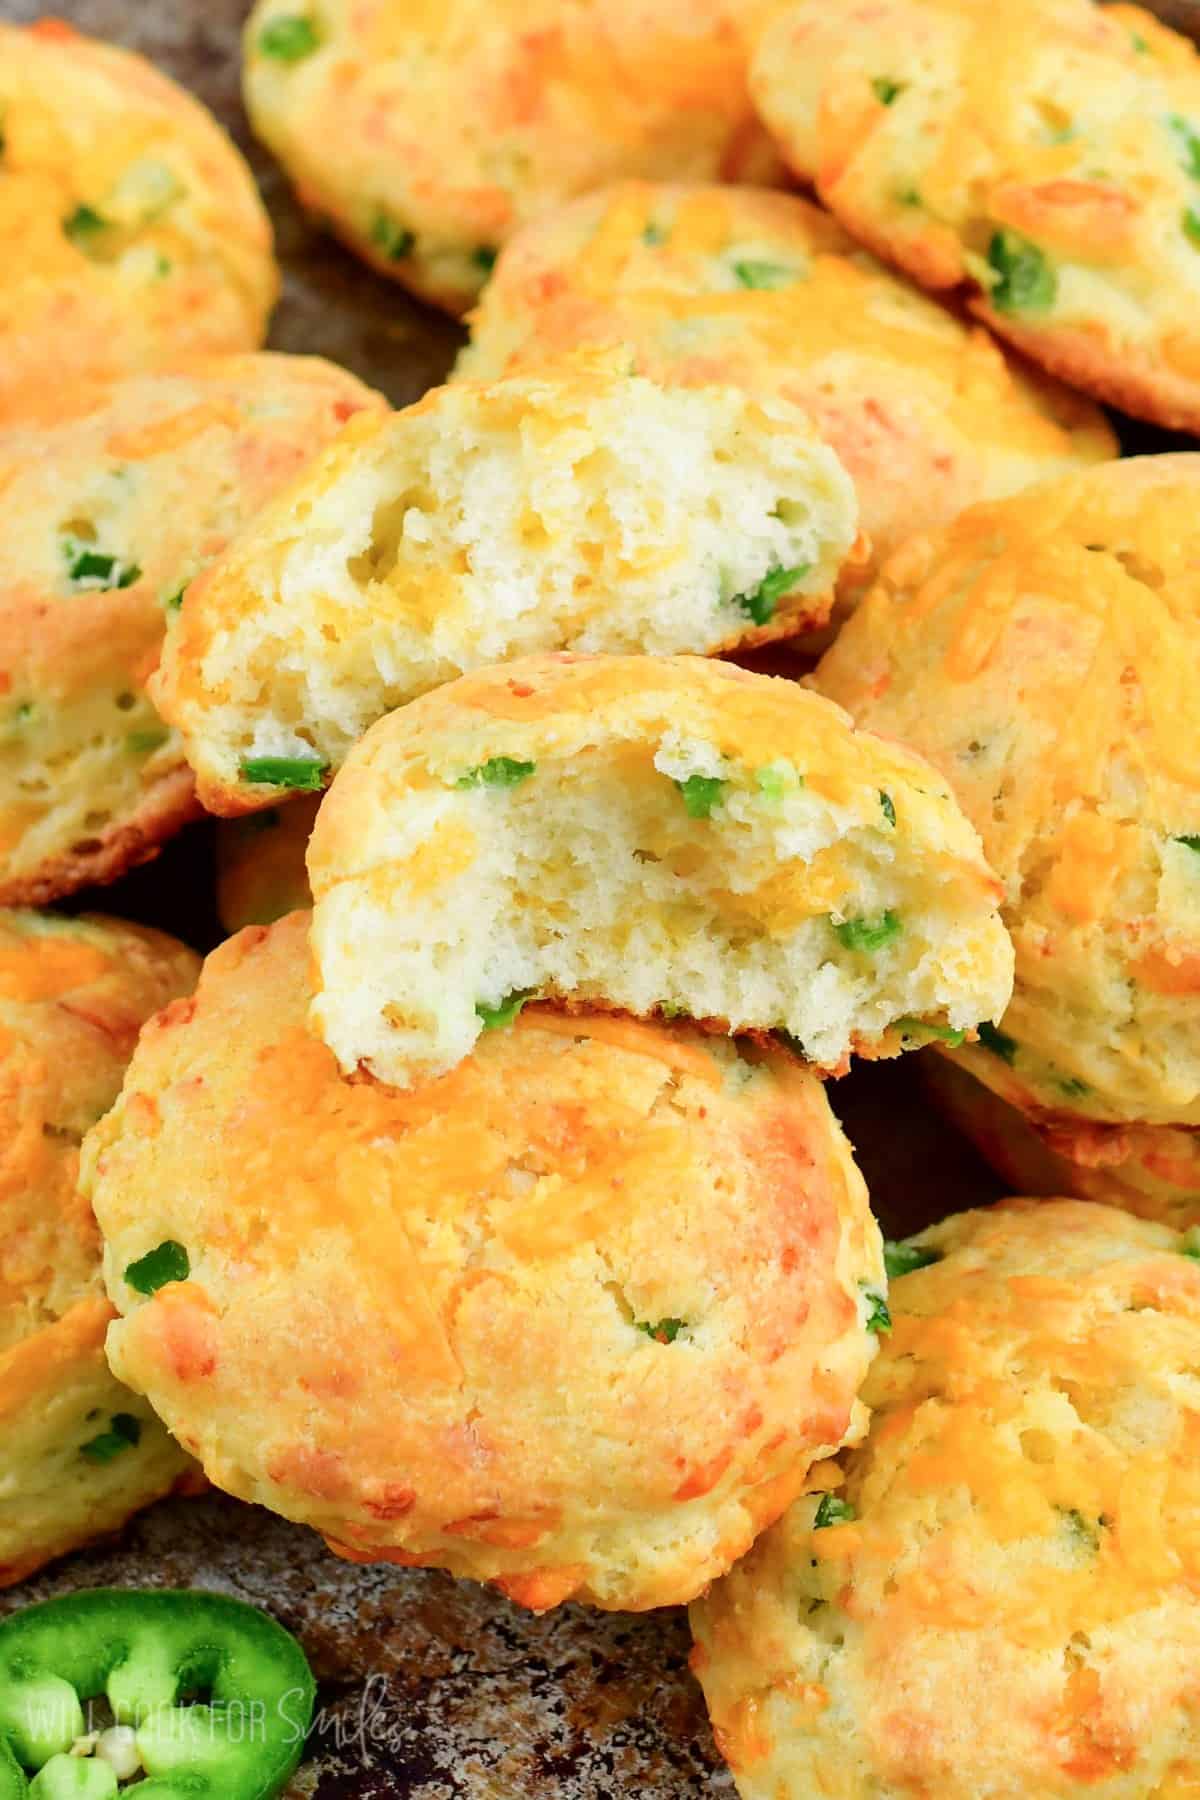 Jalapeno Cheddar biscuits stacked on top of each other with one biscuit split in half.